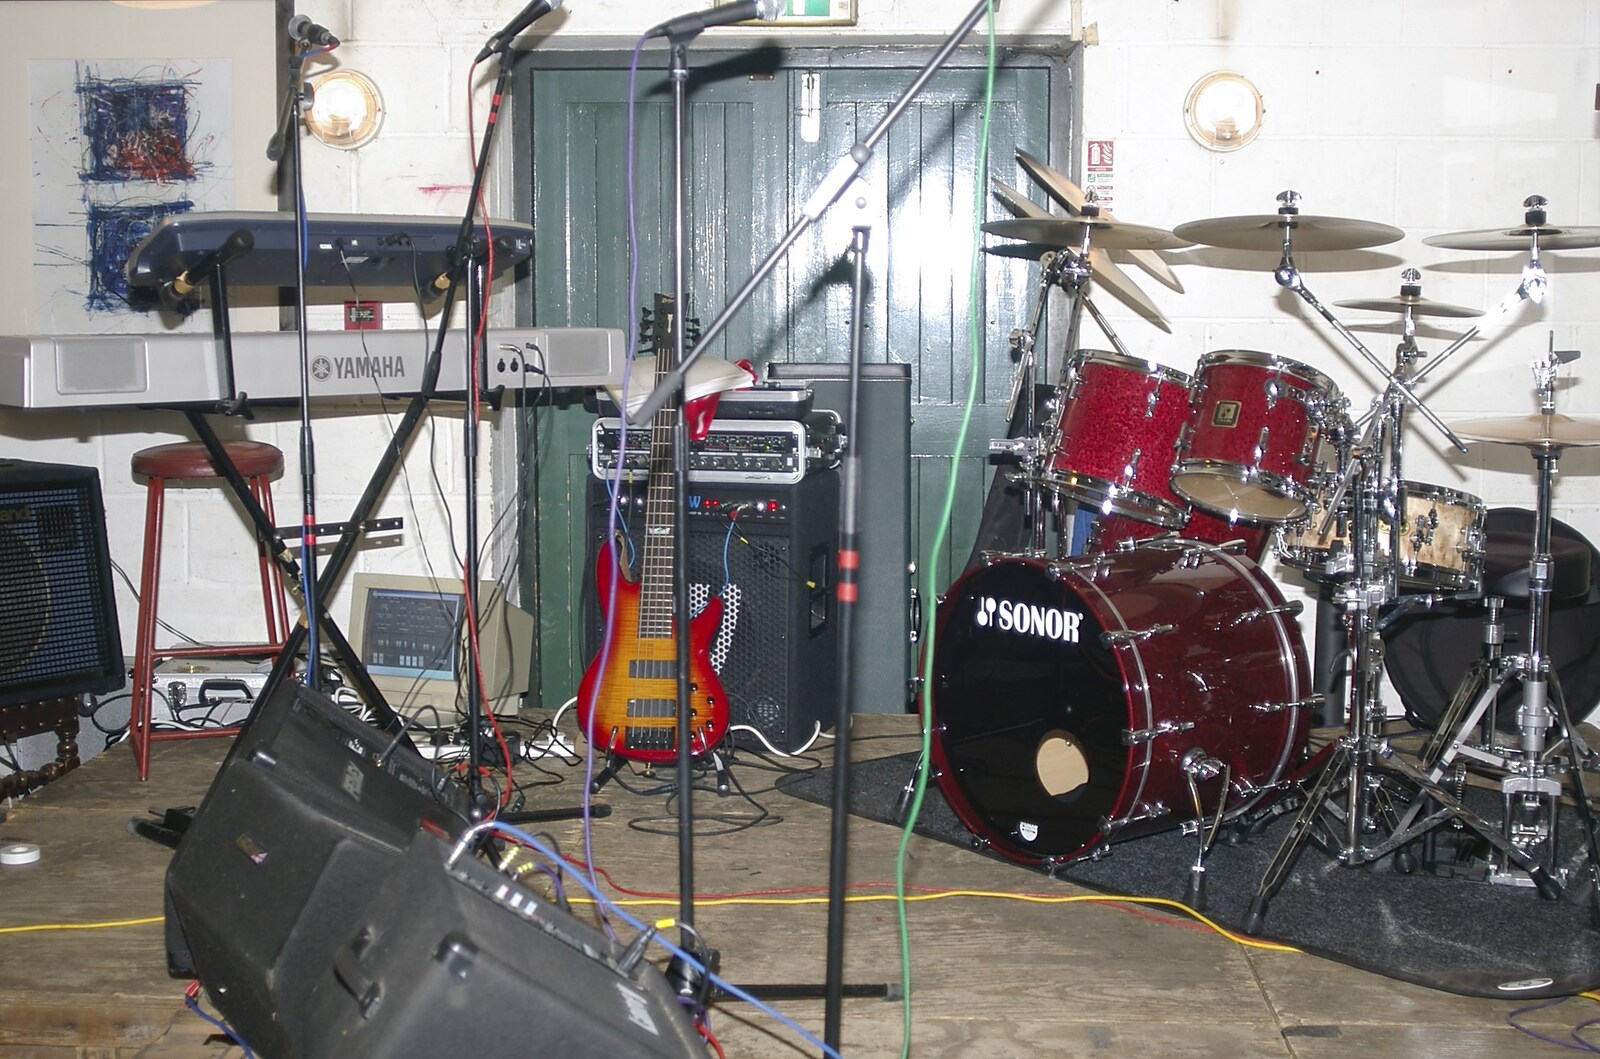 The BBs' Last-Ever Gig at The Cider Shed, Banham, Norfolk - 19th November 2004: The stage is set